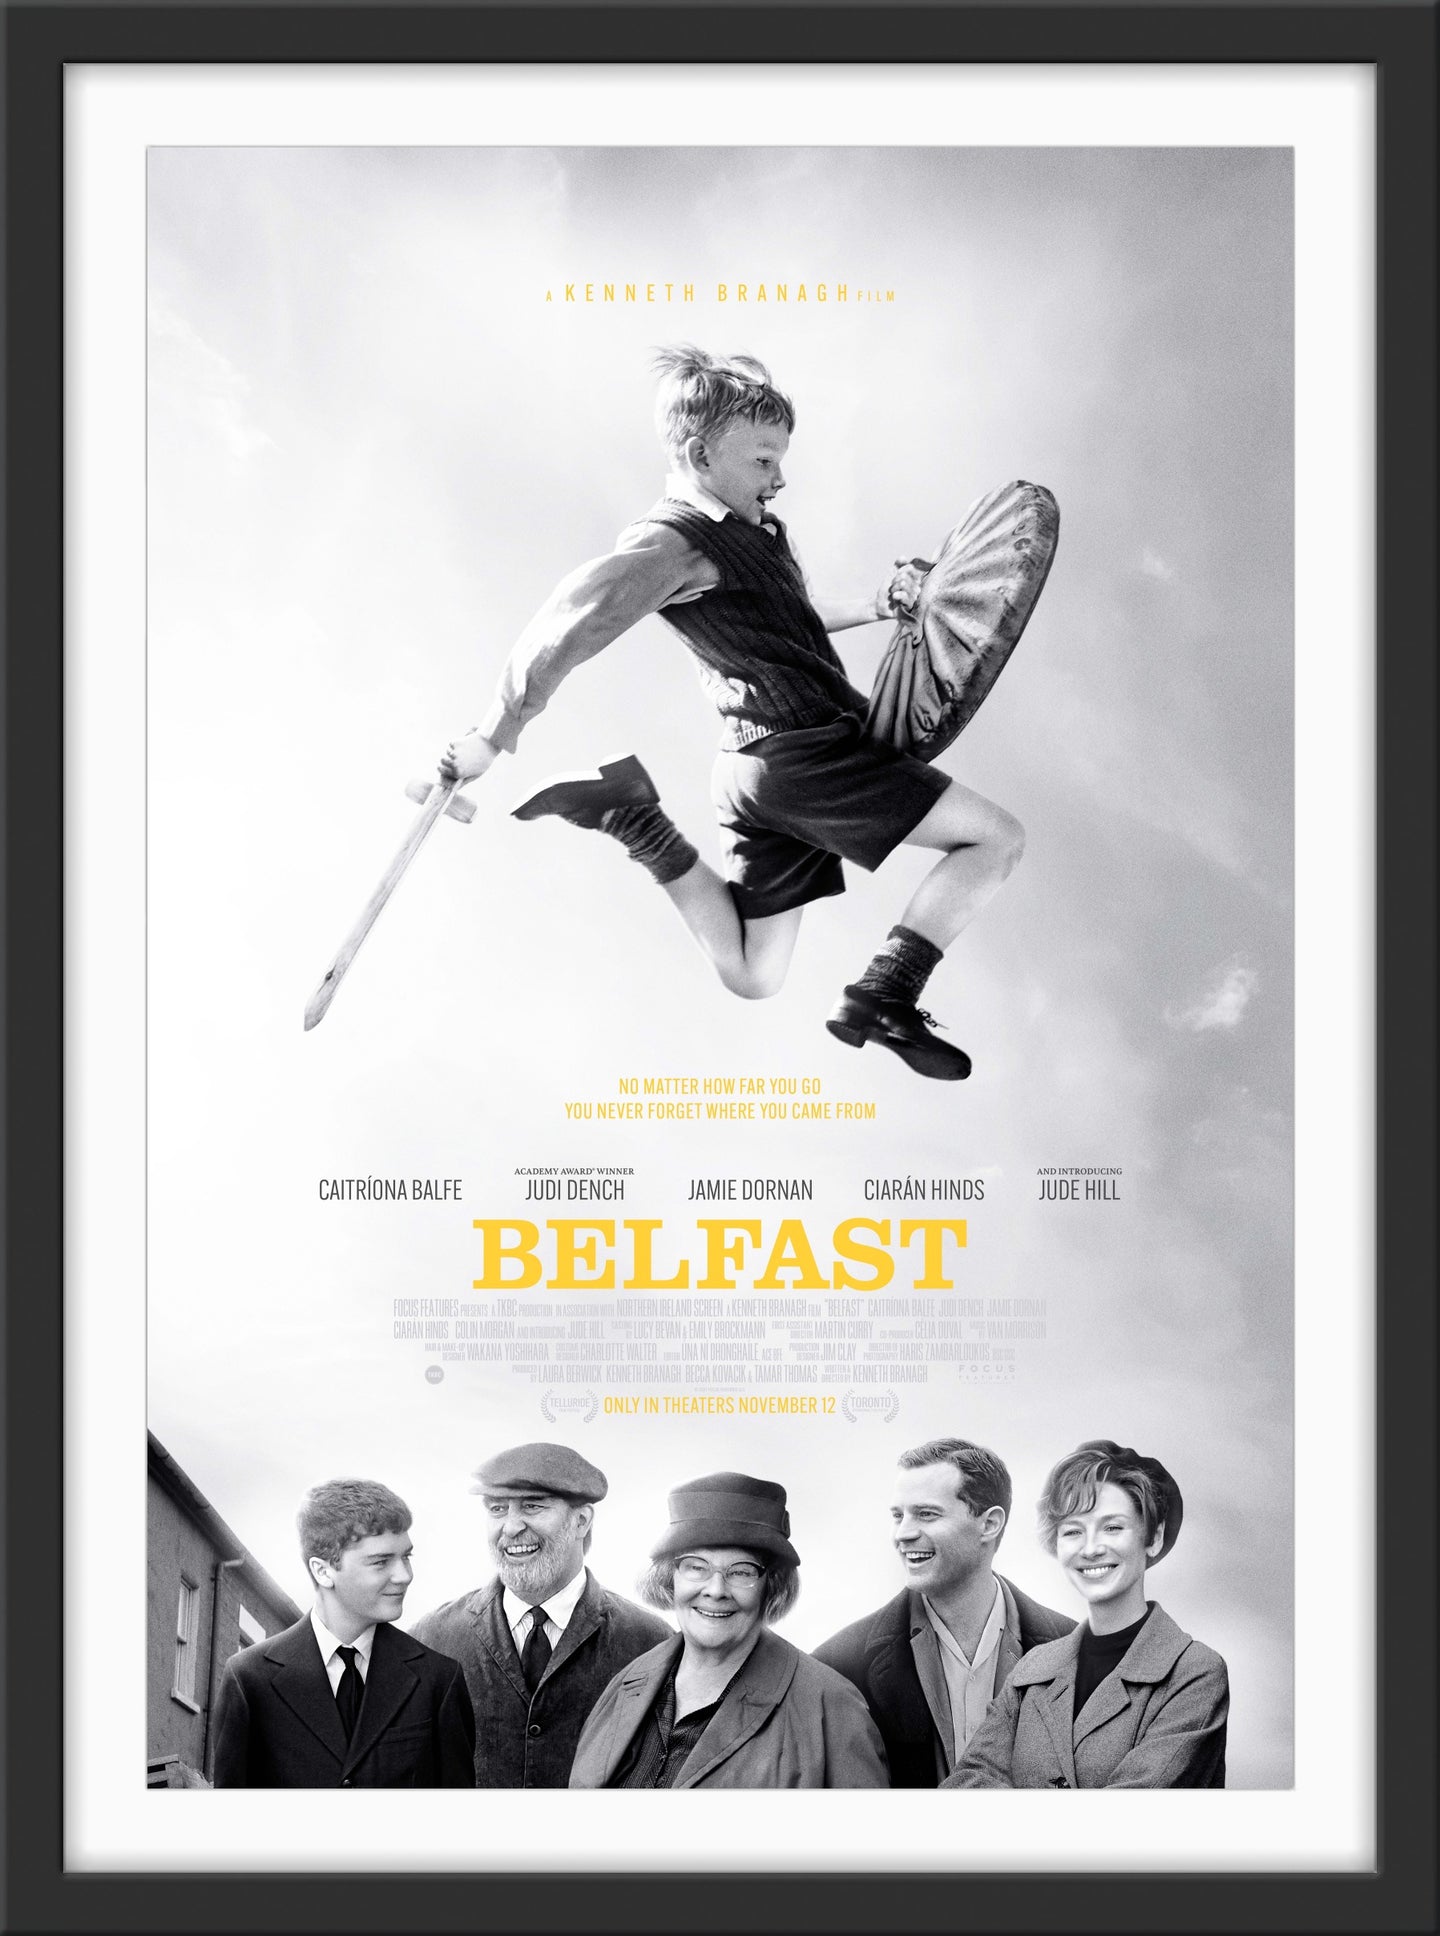 An original movie poster for the Kenneth Branagh film Belfast